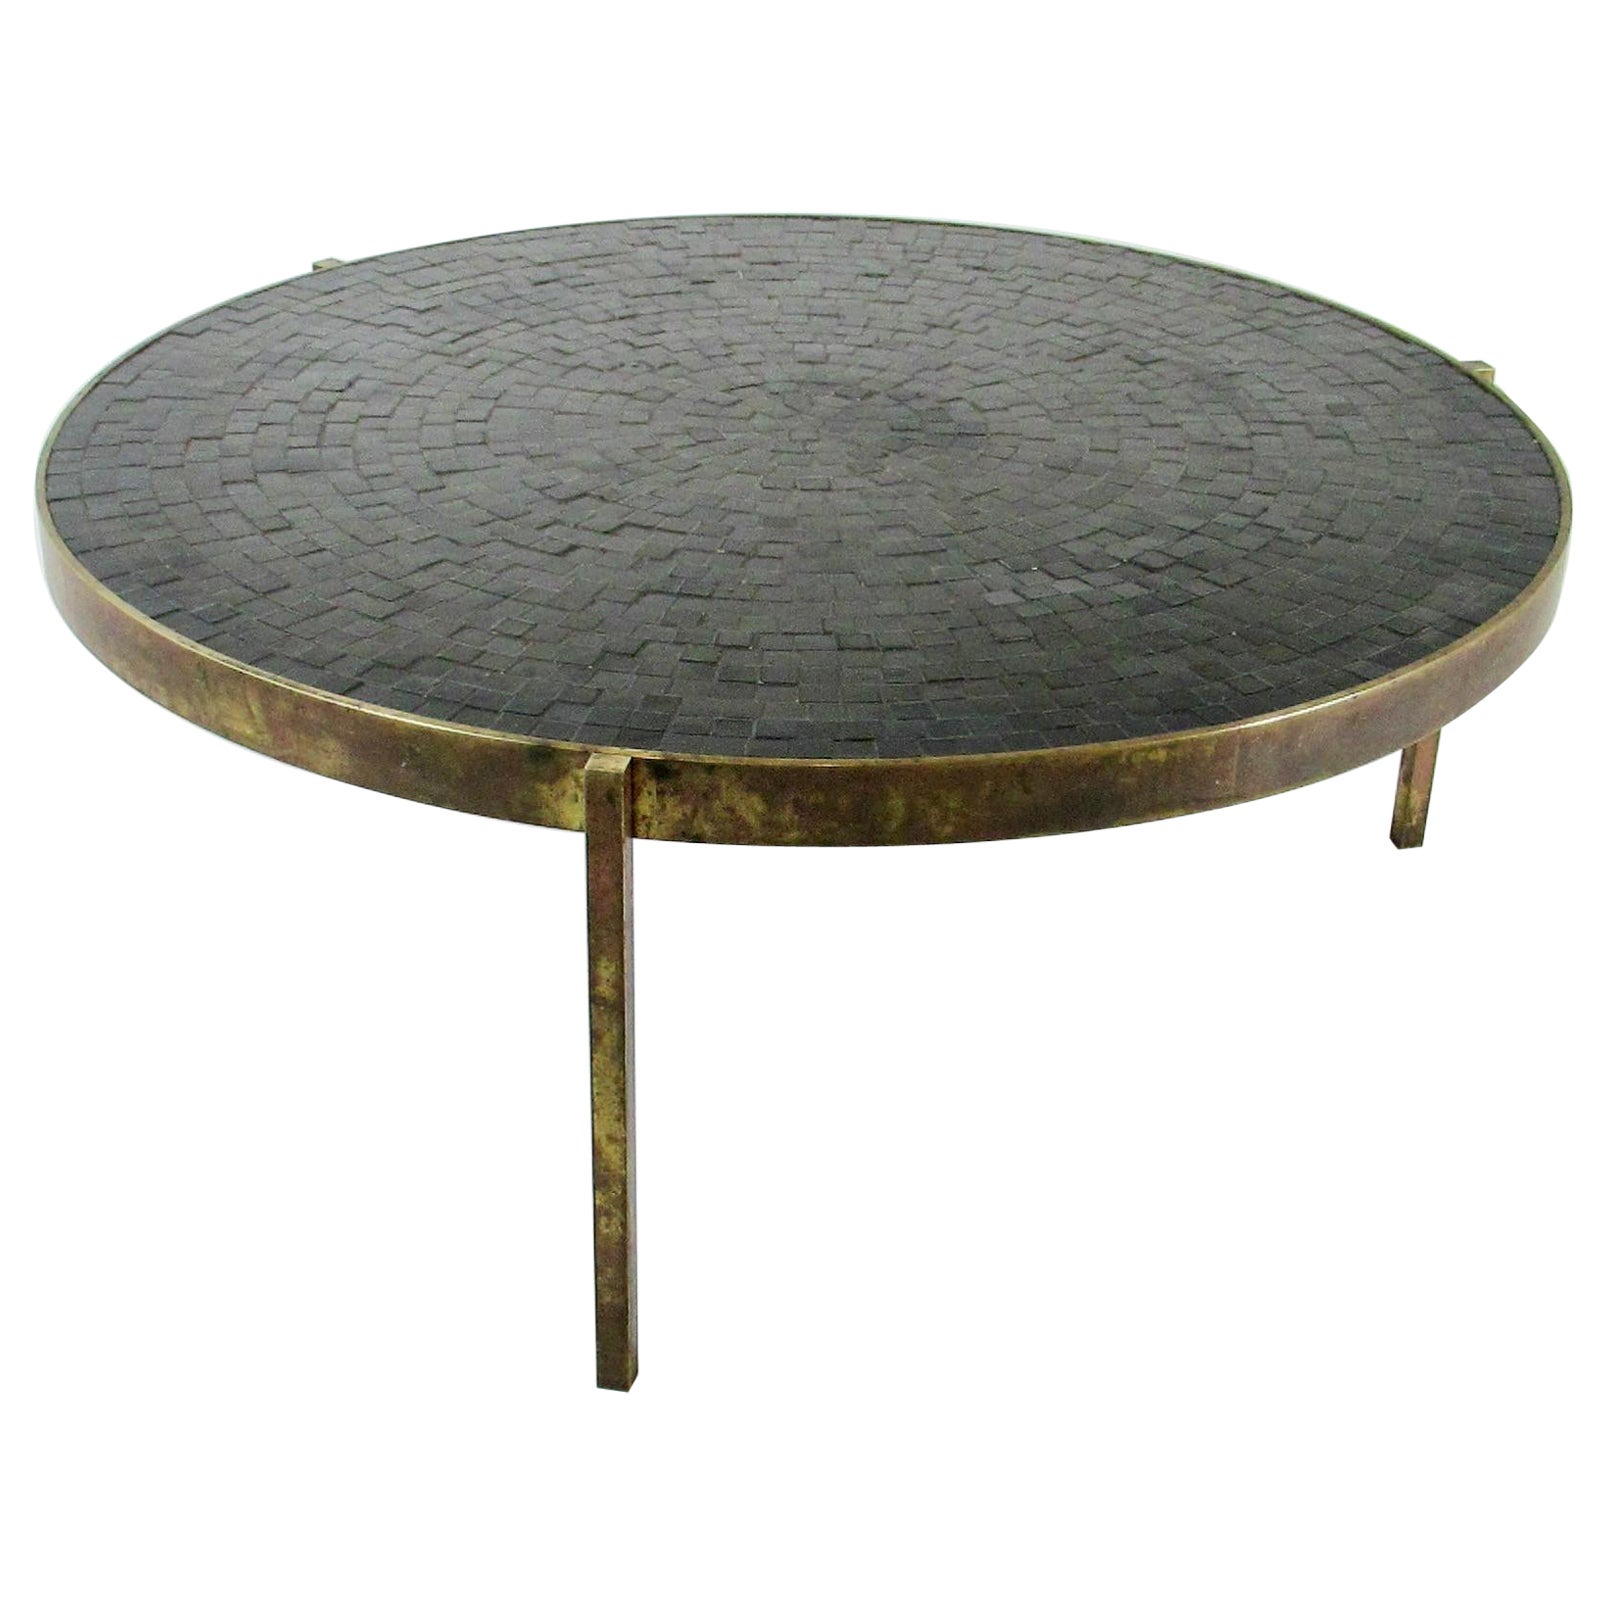 Round Top Bronze Base Cocktail Table with Concentric Design Black Tiles For Sale